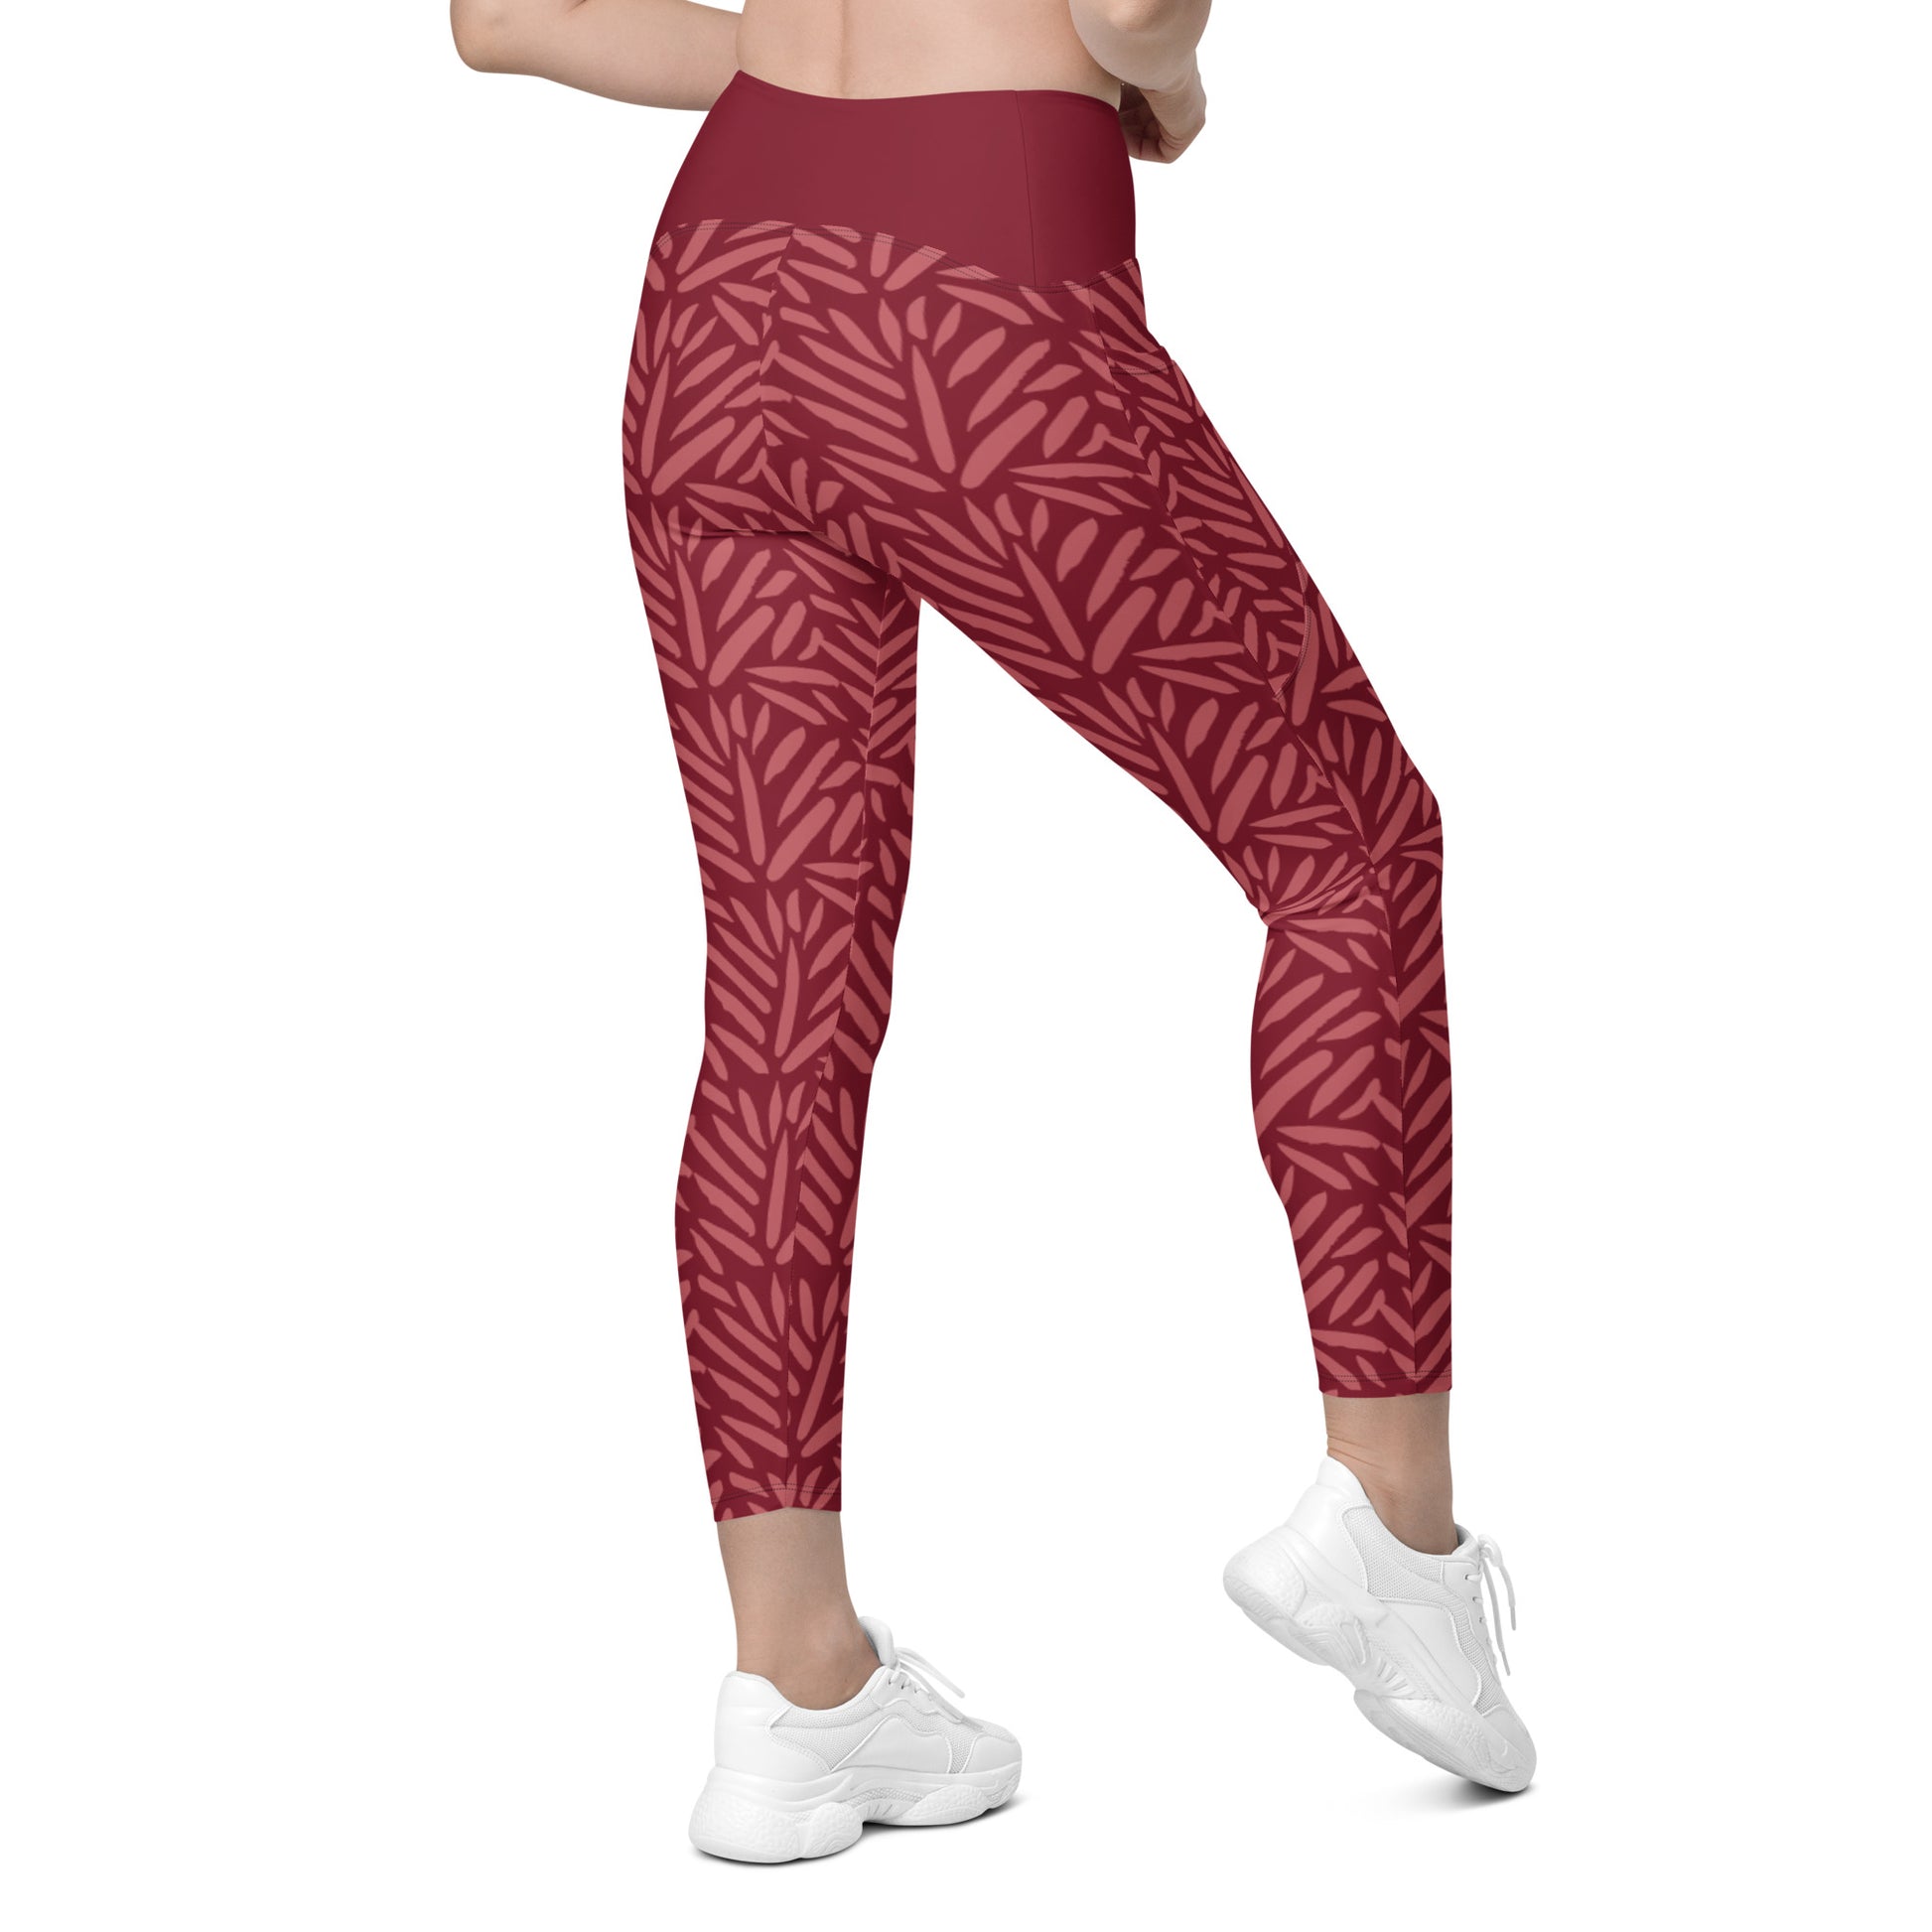  Jain ChillOut by Women's High-Waisted Support Leggings sold by Jain Yoga